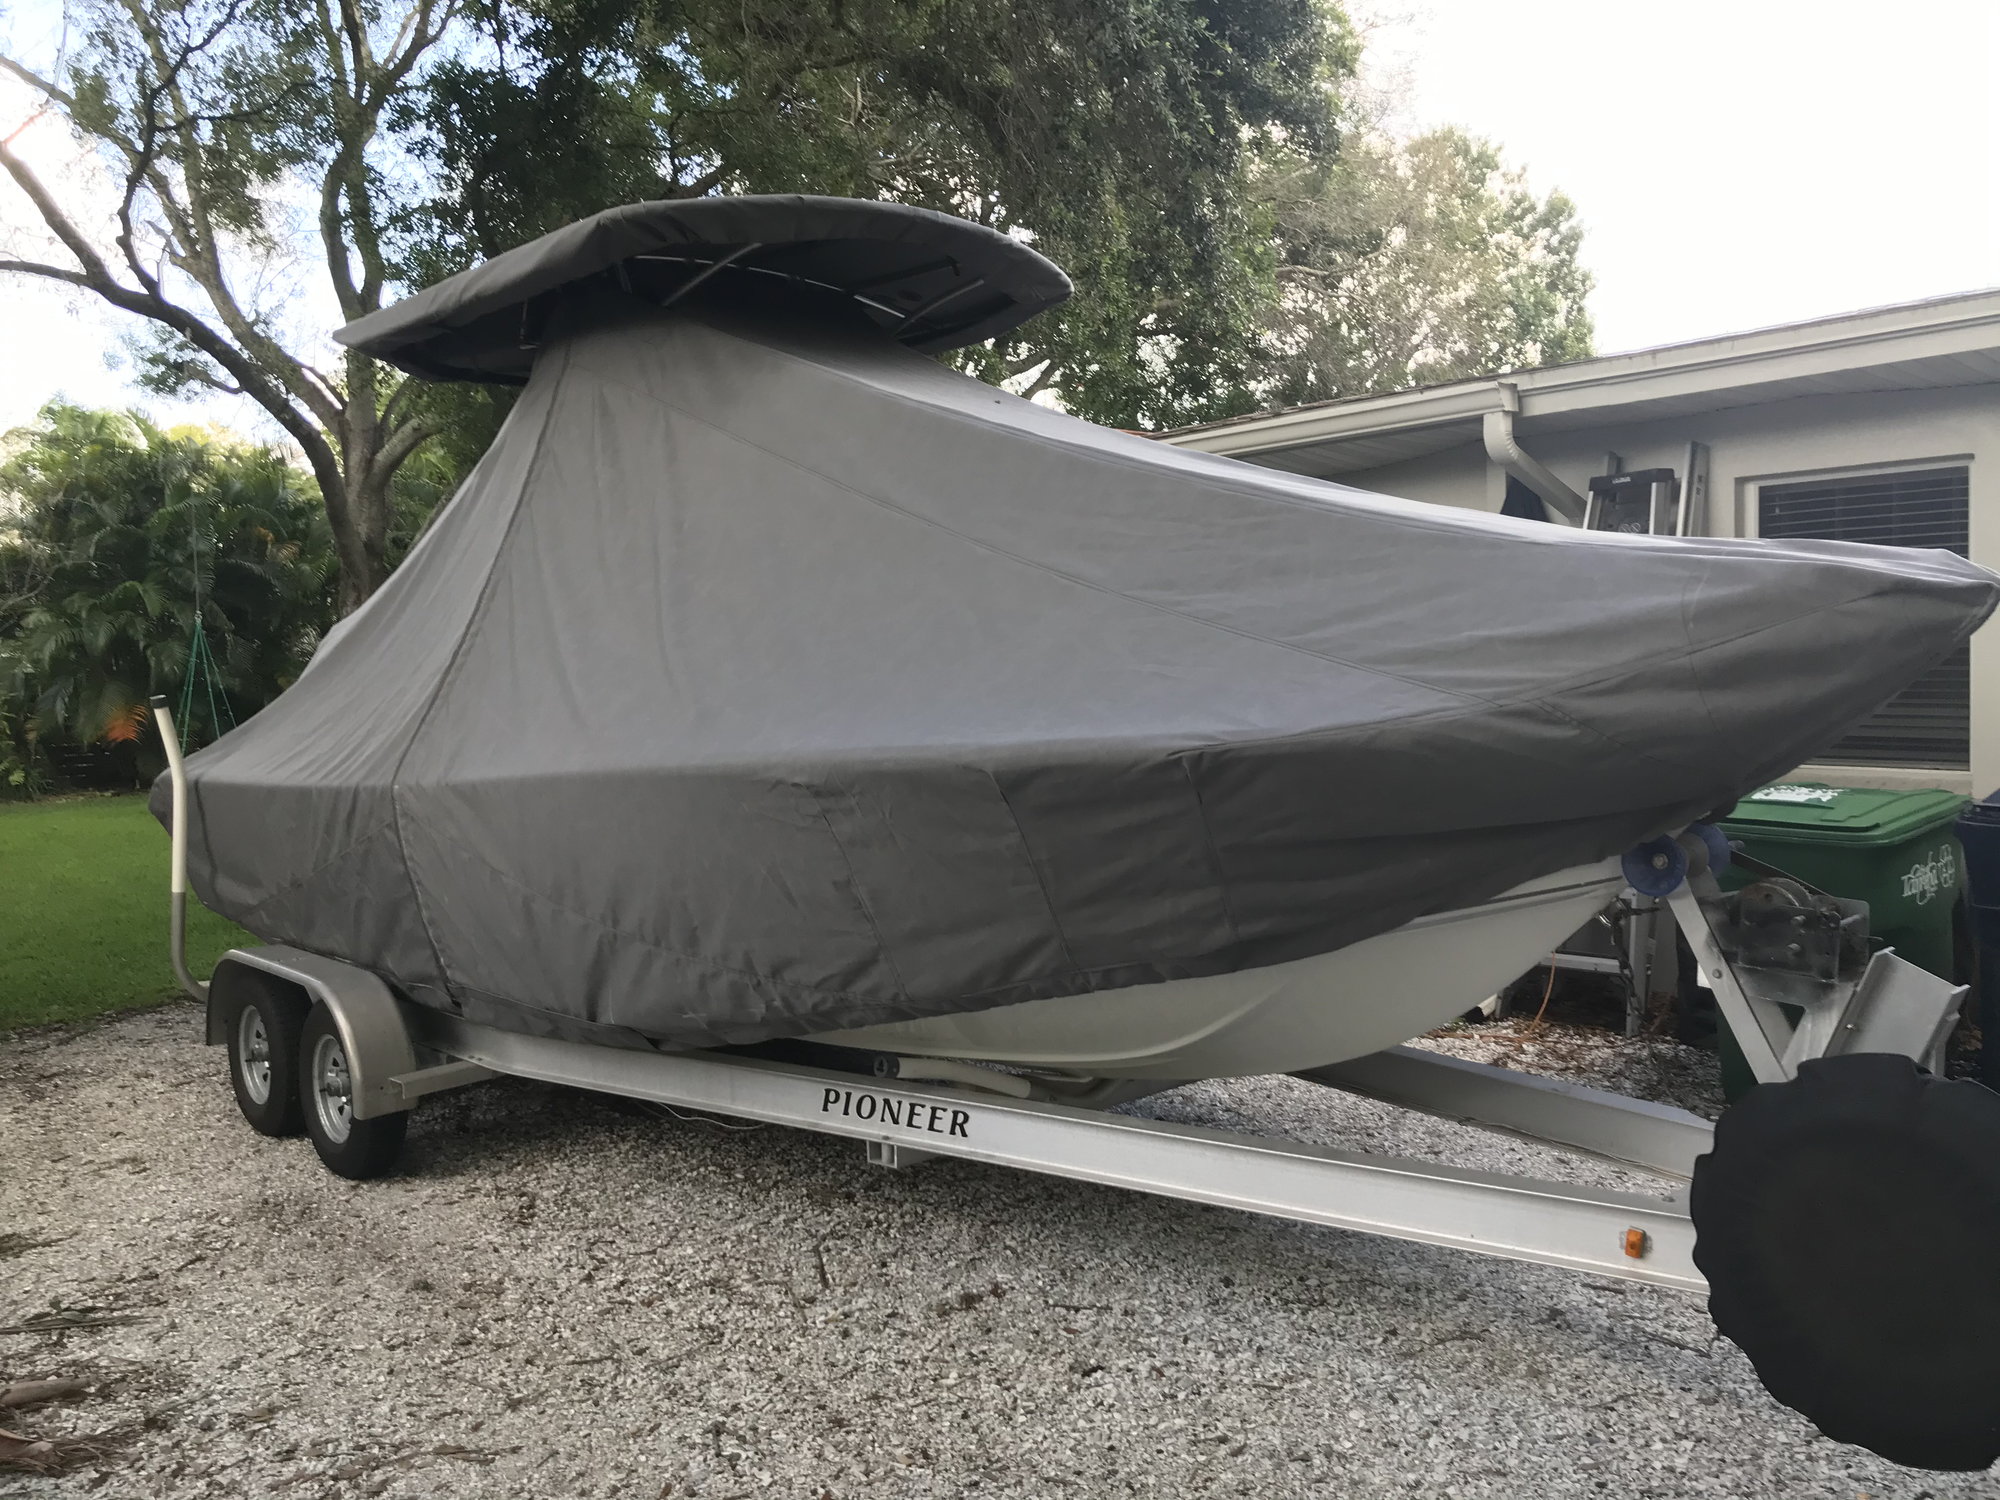 Tampa area custom boat cover - The Hull Truth - Boating and ...